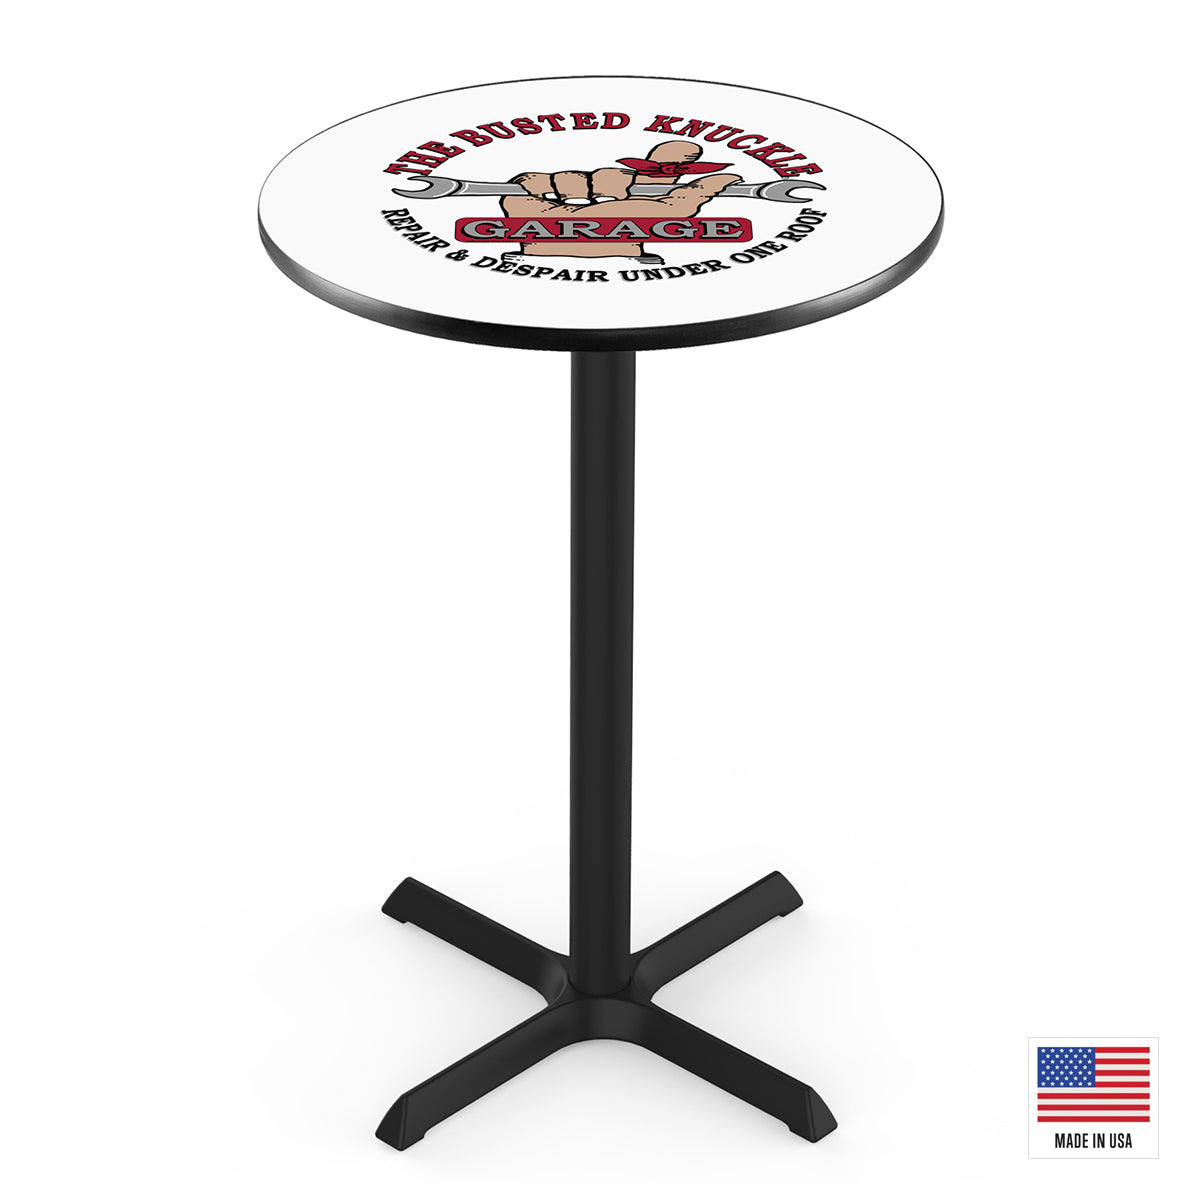 The Busted Knuckle Garage Pub Table - White Top